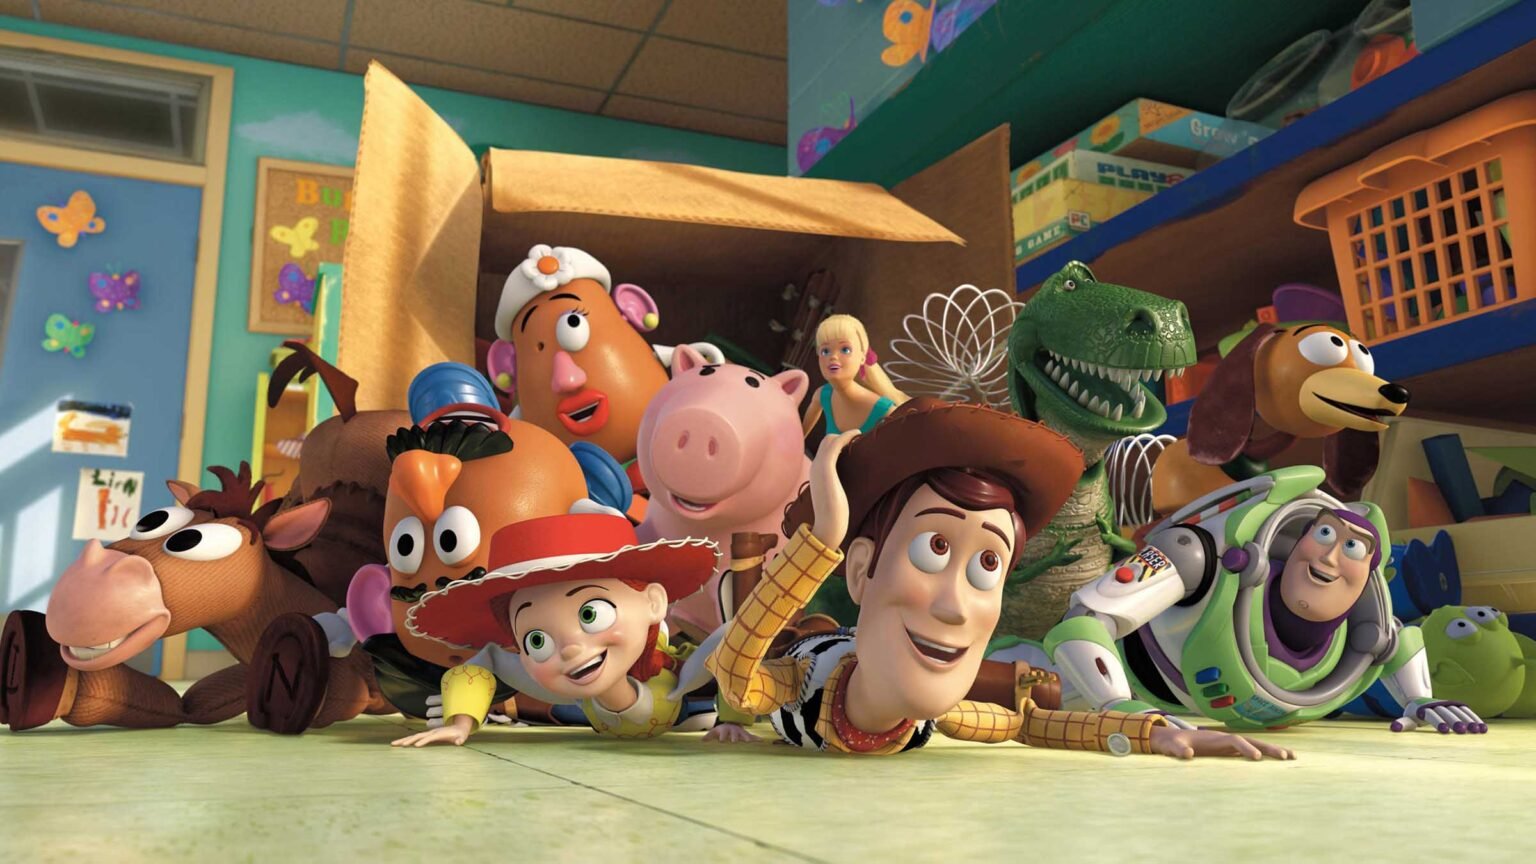 How well do you know the world of Disney-Pixar's 'Toy Story'? See if you got a friend in the 'Toy Story' cast by taking our quiz!